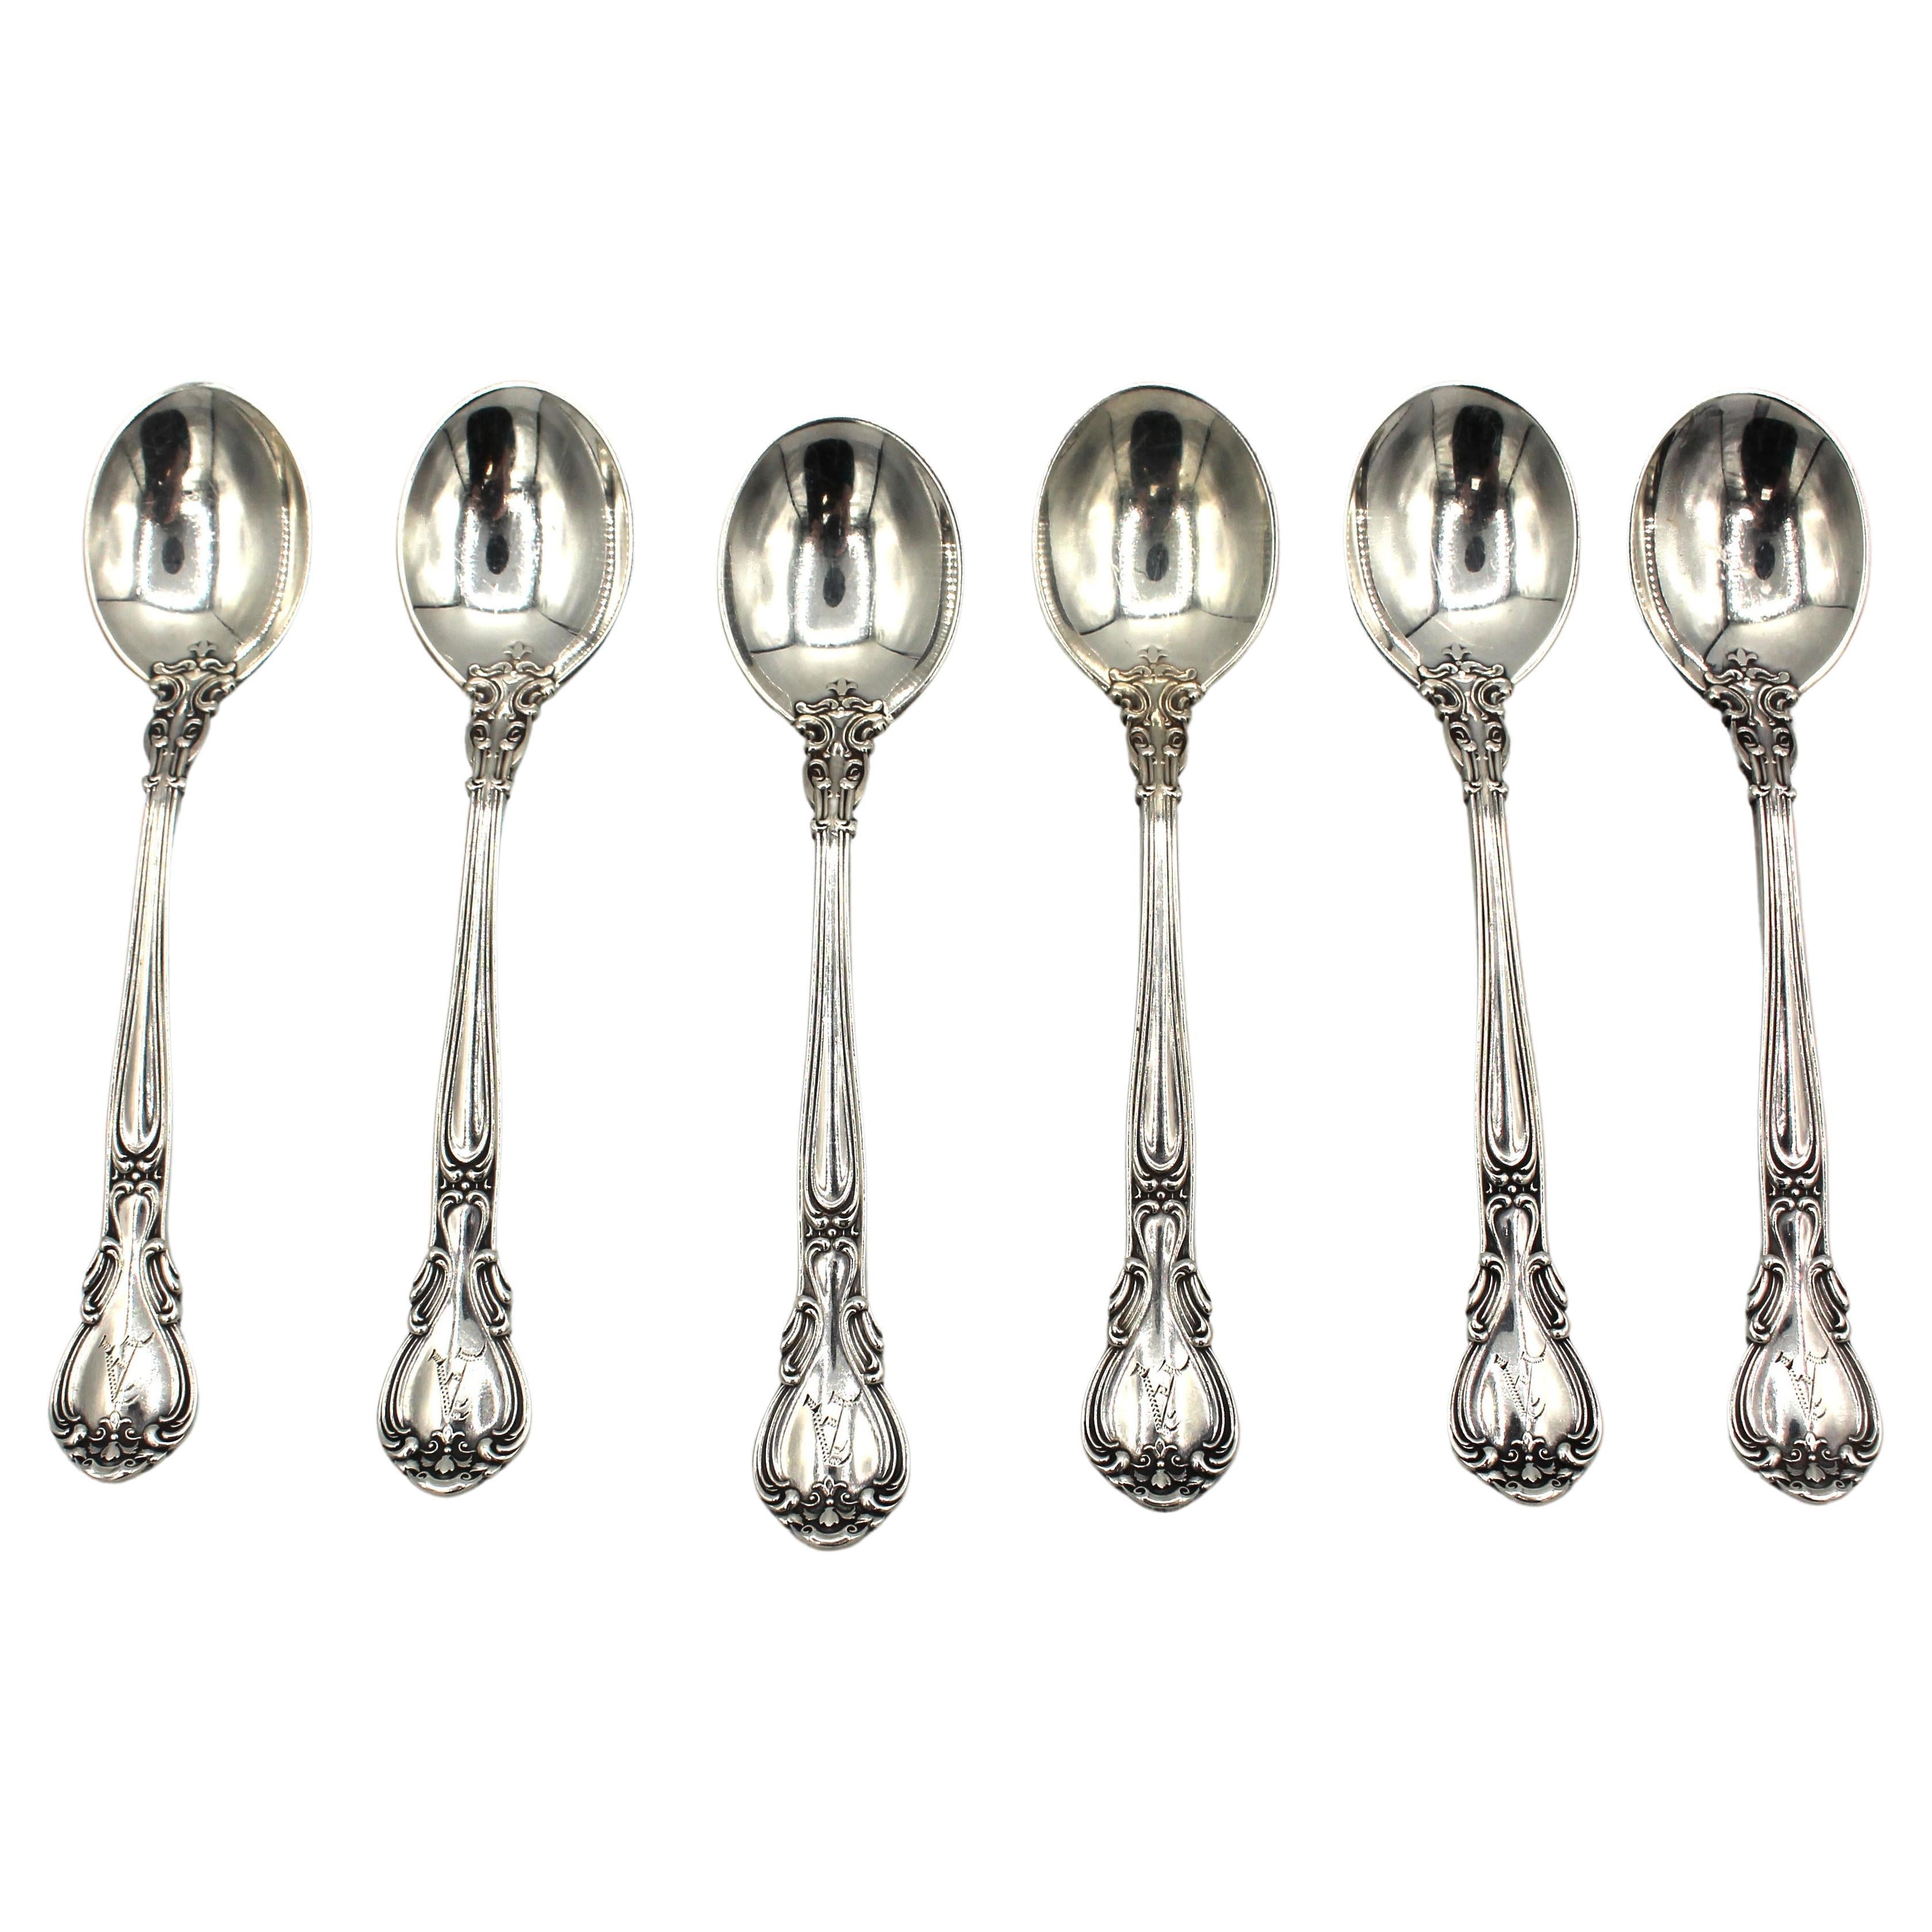 Set of 6 Pre-1950 Chantilly Pattern Chocolate Spoons by Gorham